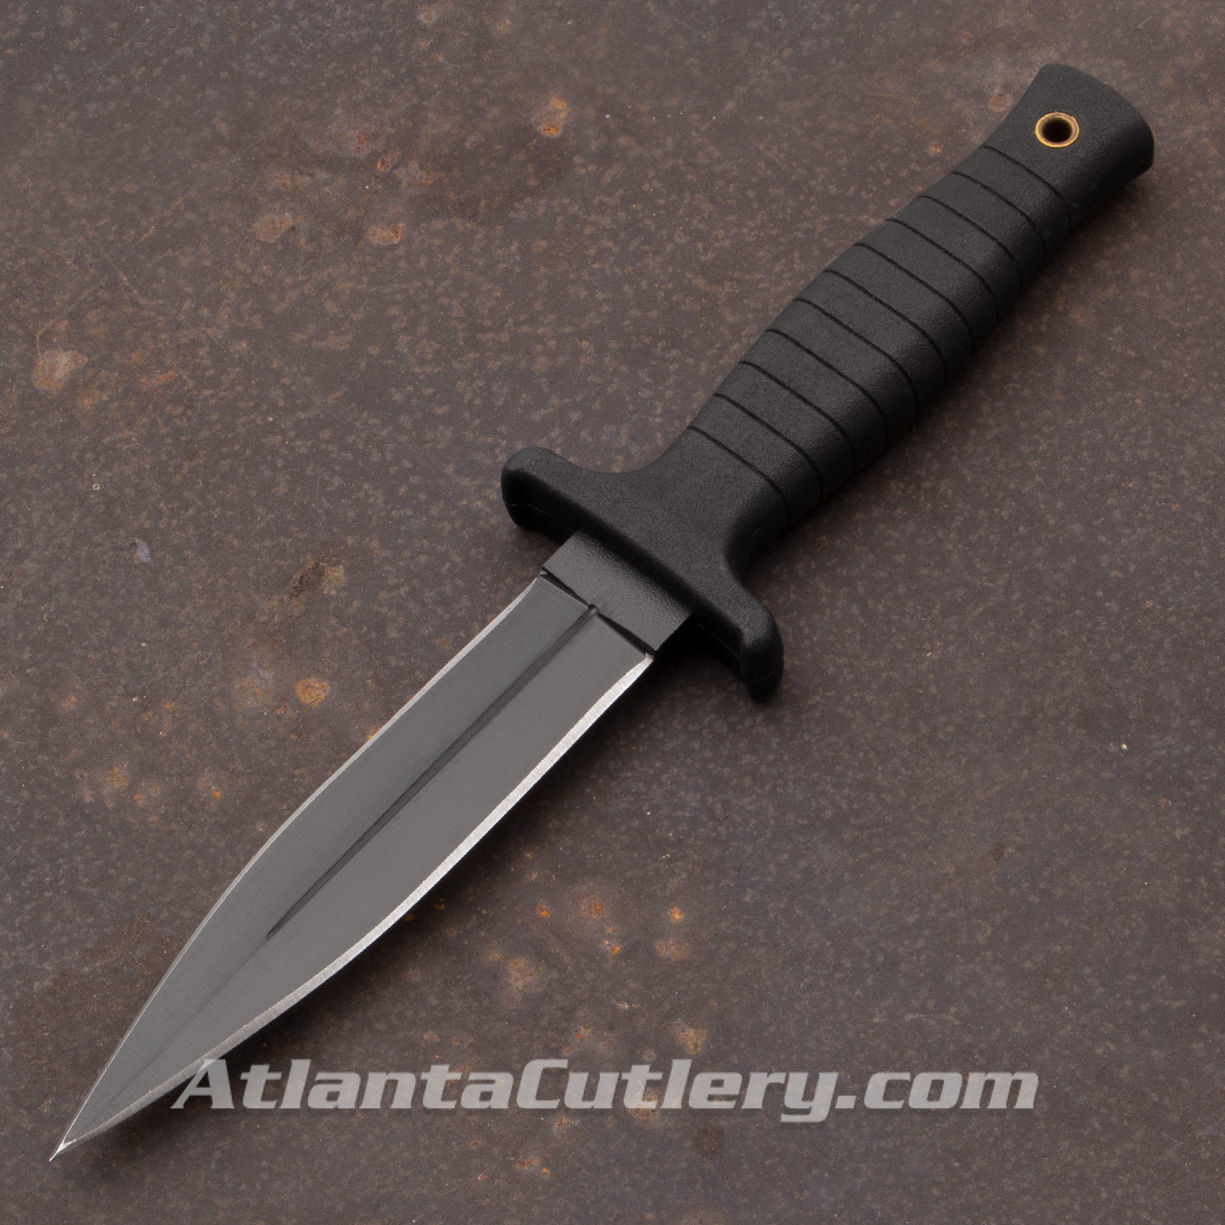 9" Combat Boot Knife with black handle and blade, black sheath with belt loop and spring loaded boot clip